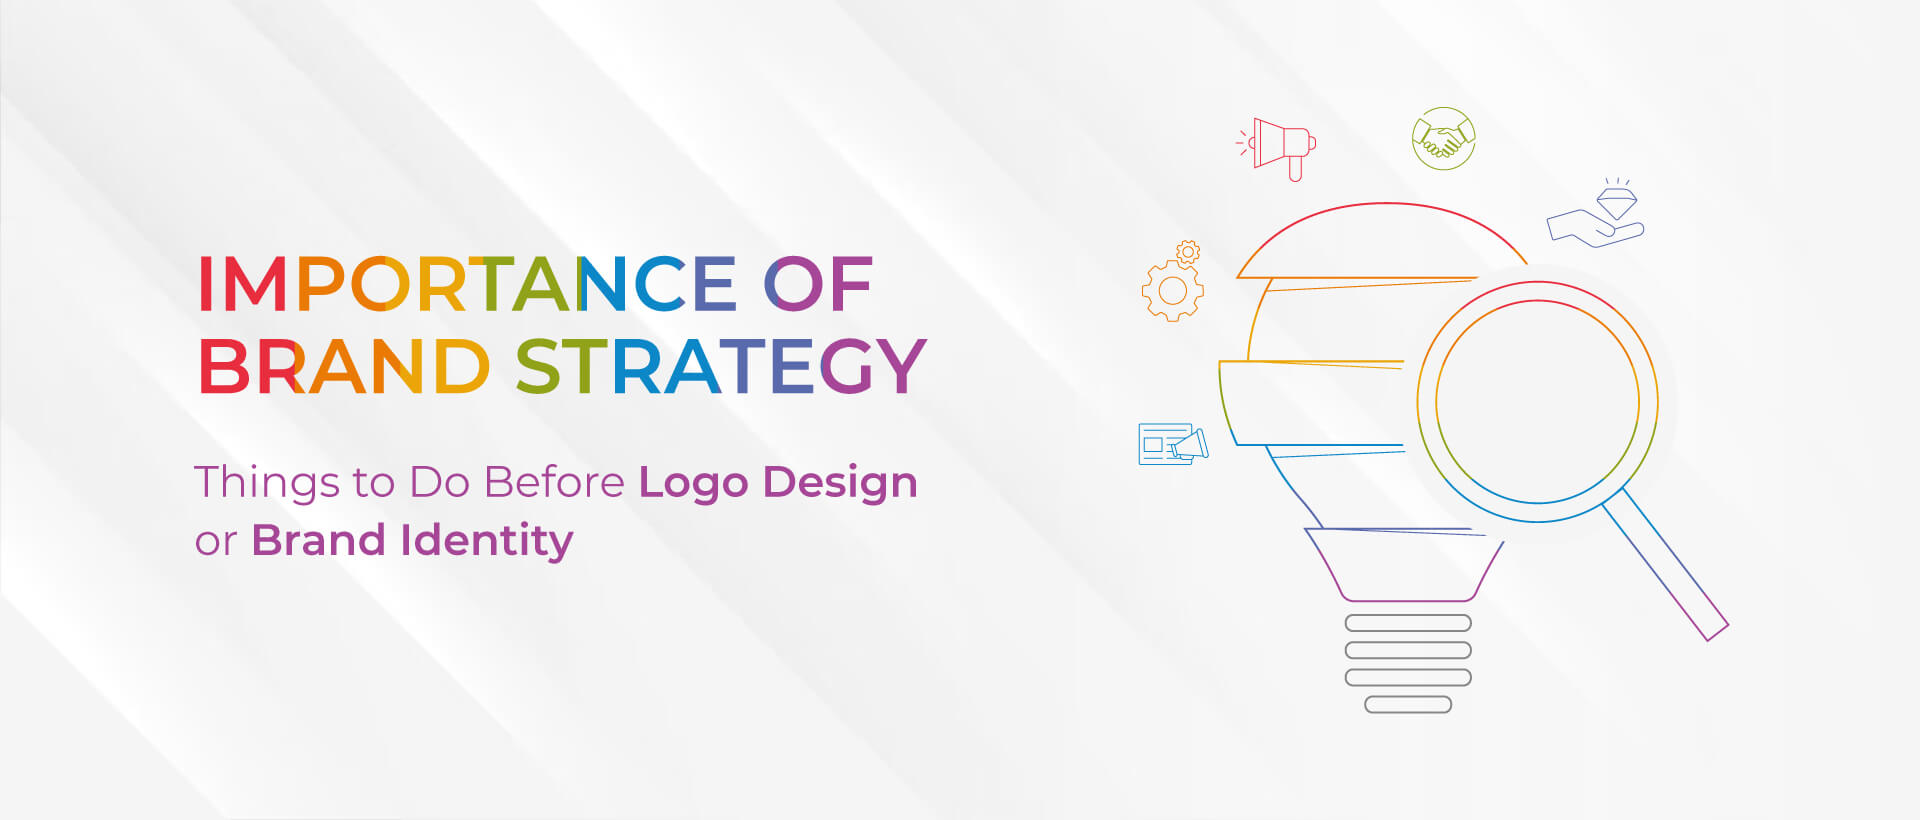 Importance of Brand Strategy: Things to Do Before Logo Design or Brand Identity